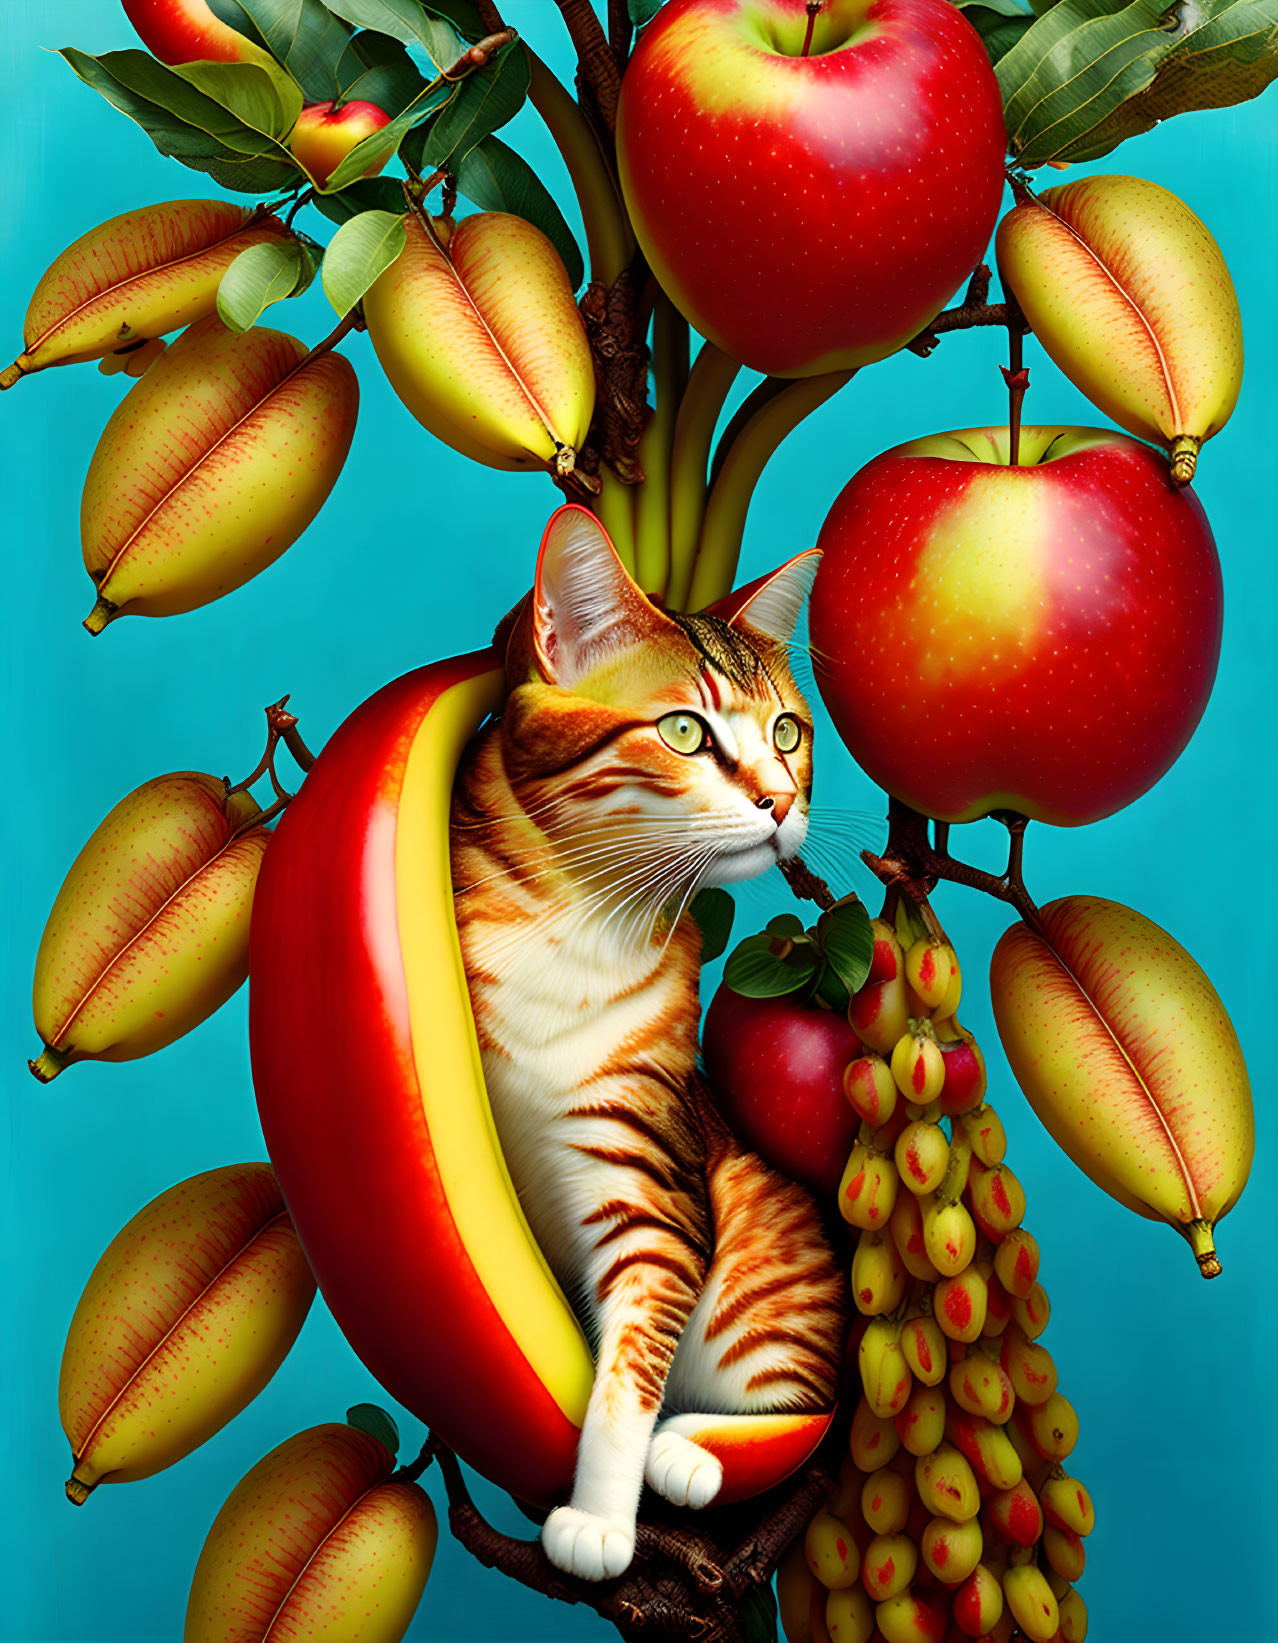 Colorful Cat in Fruit Tree with Apples, Bananas, and Berries